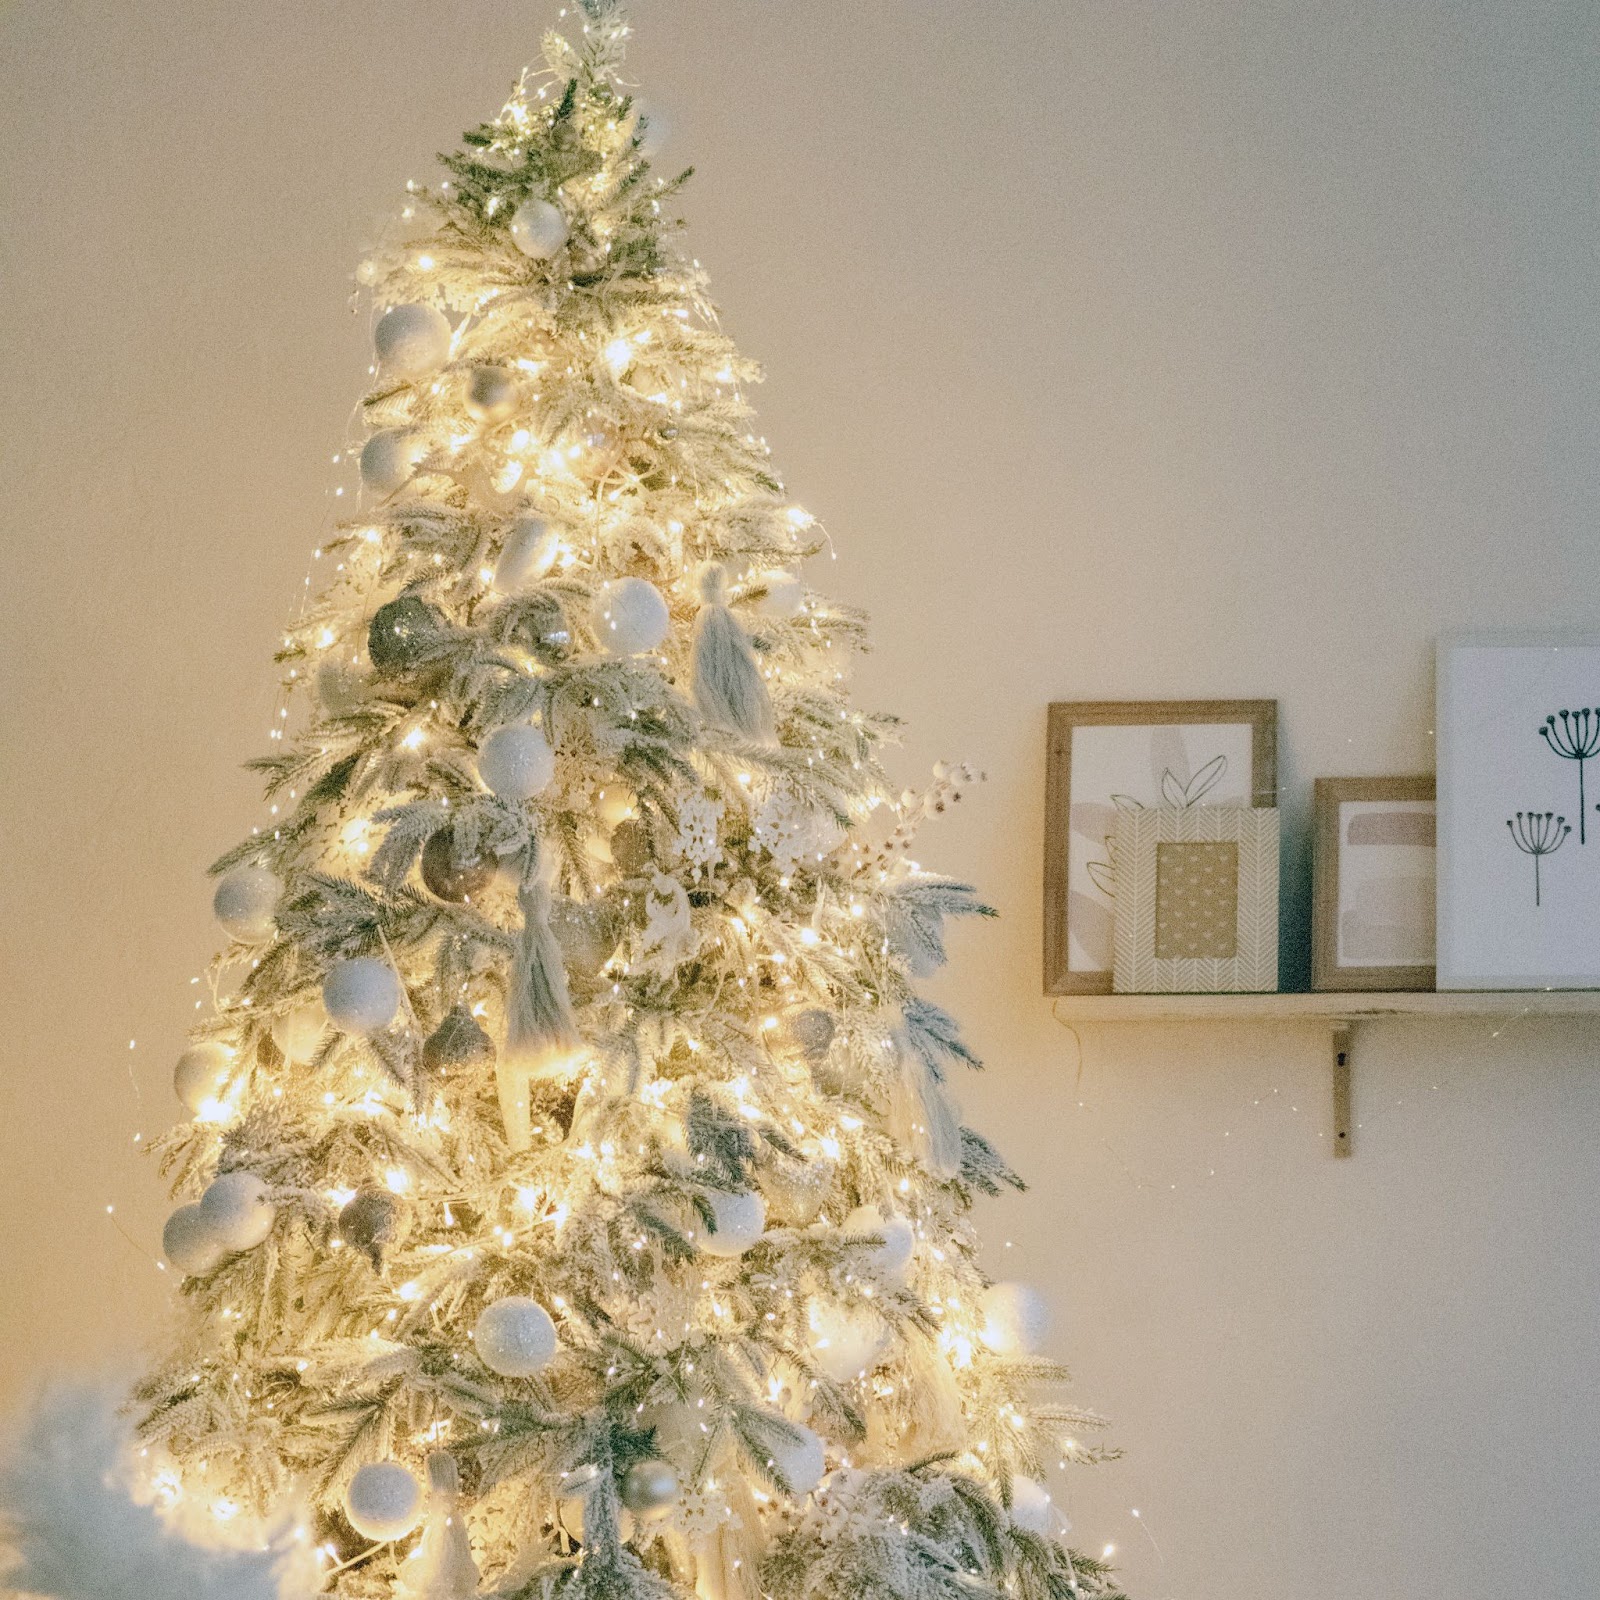 Christmas tree brightly lit with warm white lights